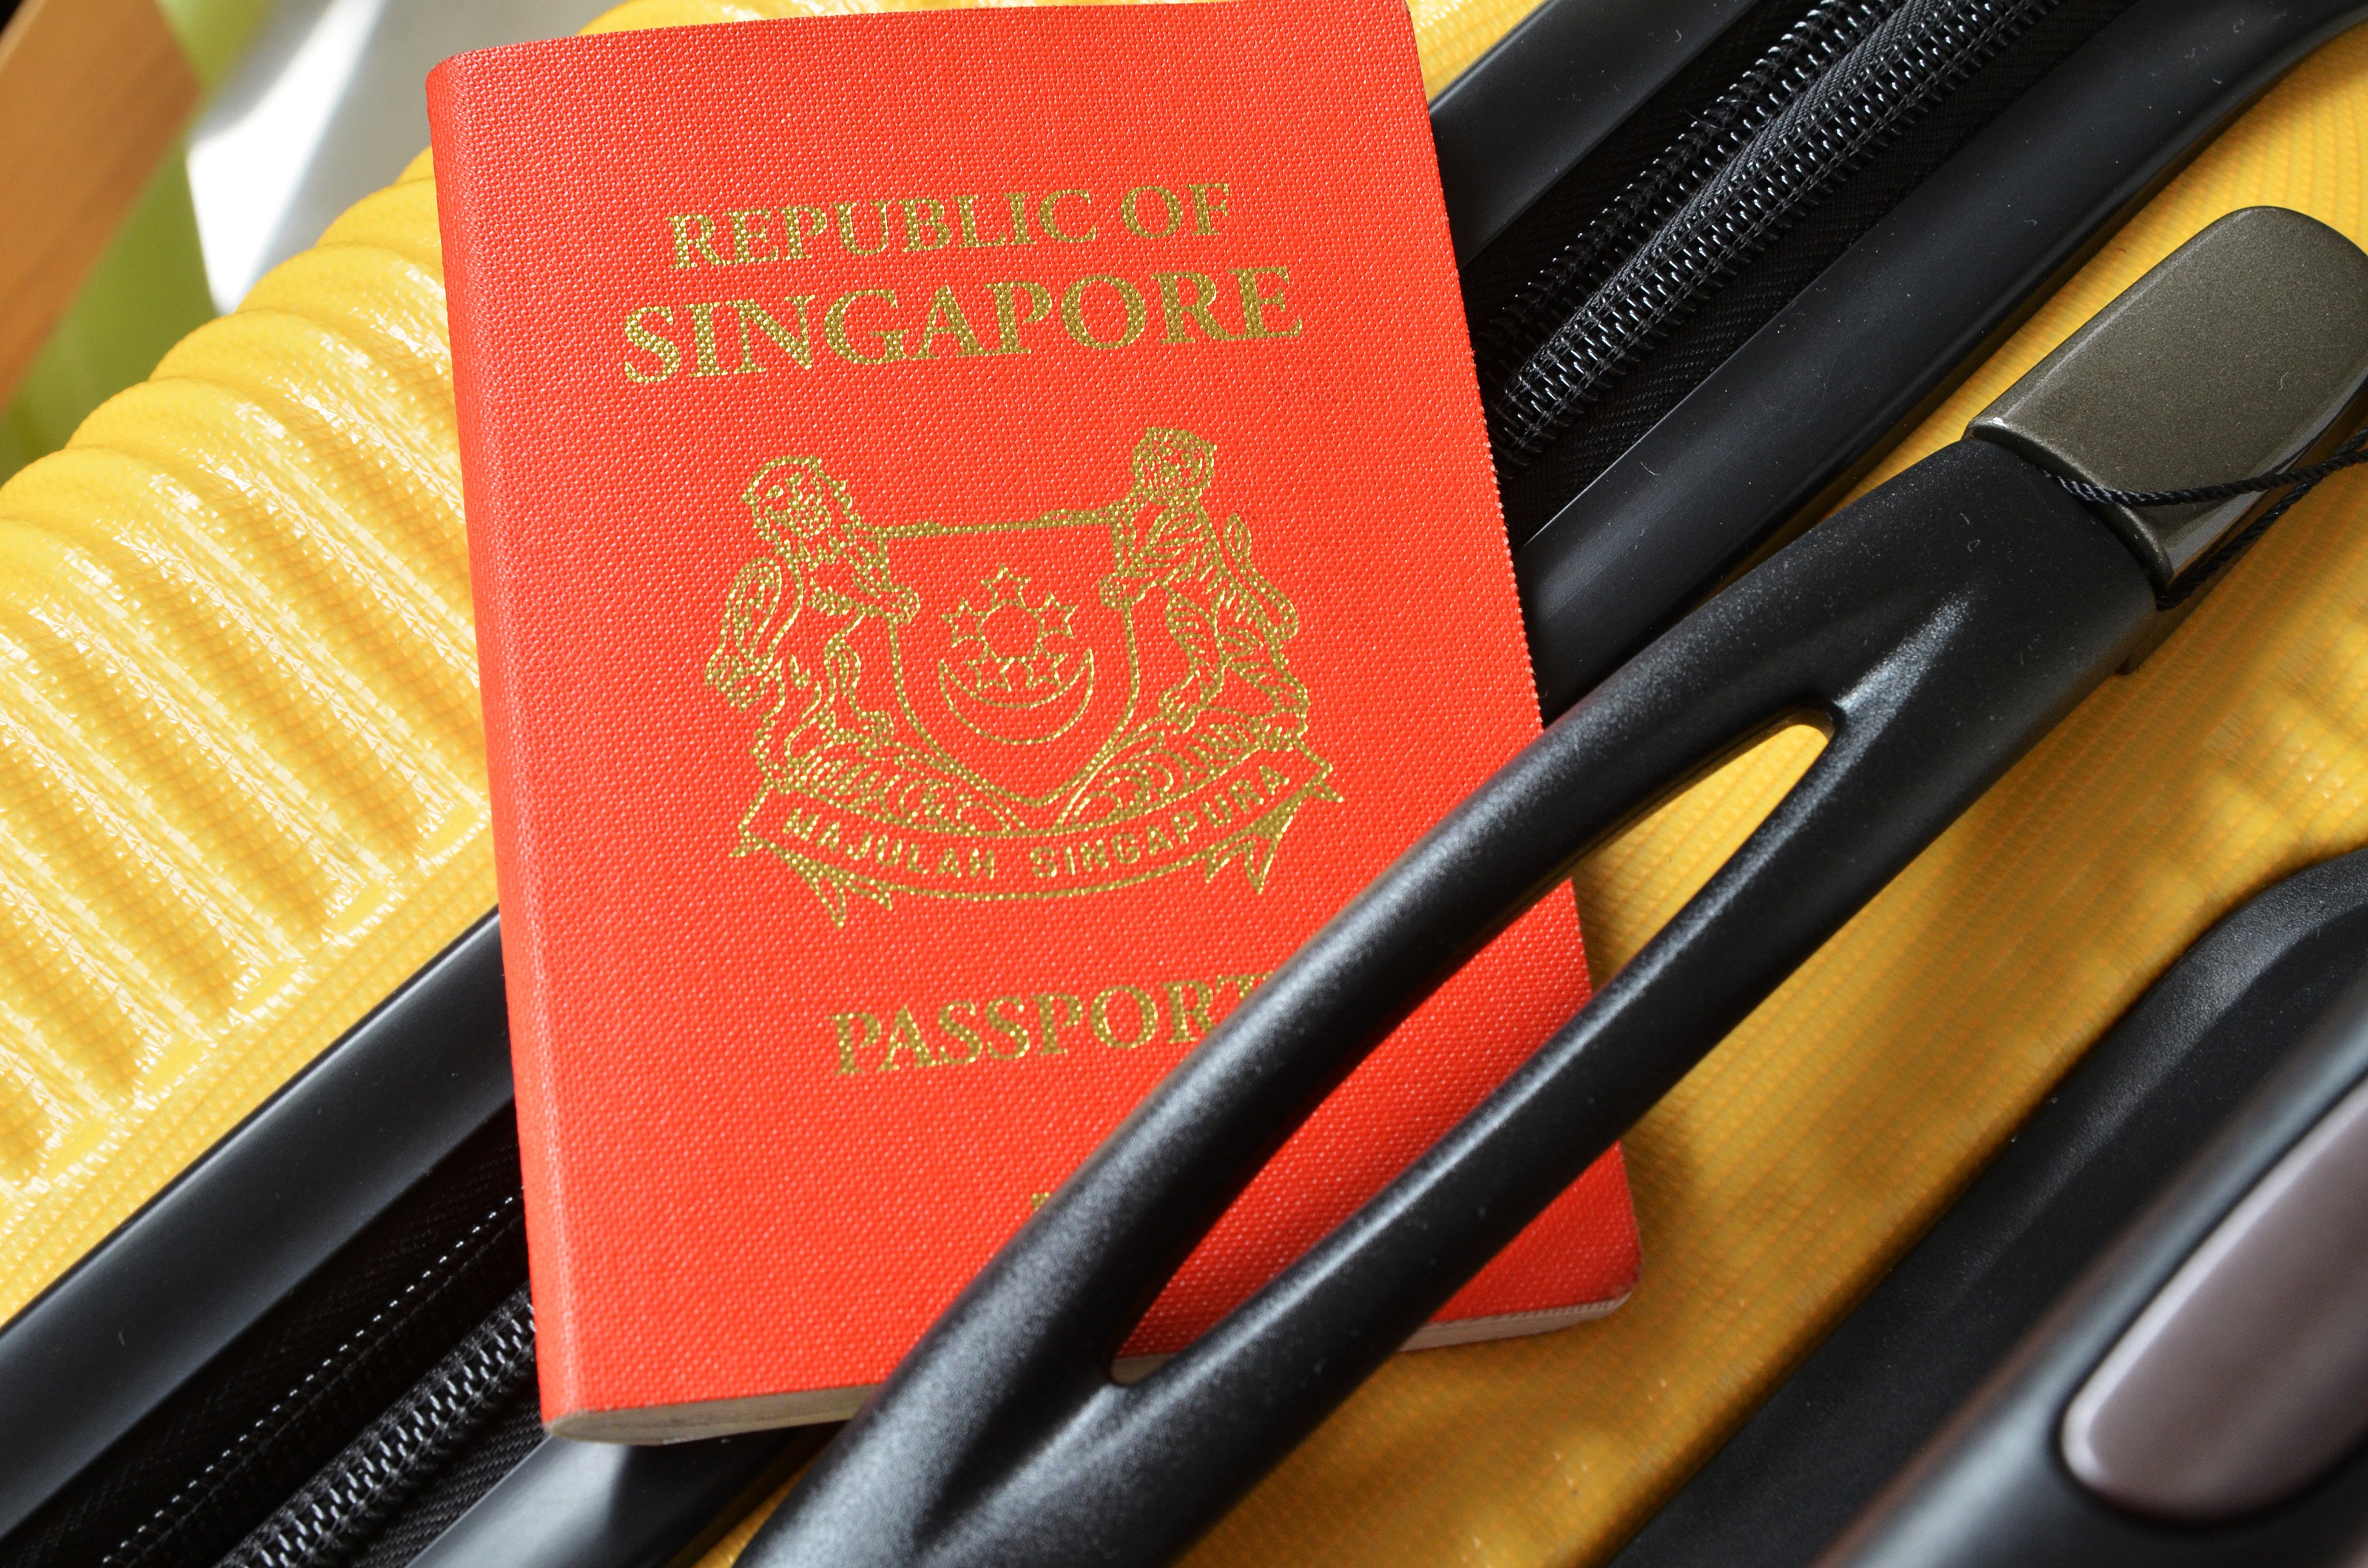 Singapore passport holders have the most flexibility for travel worldwide. Photo: Shutterstock